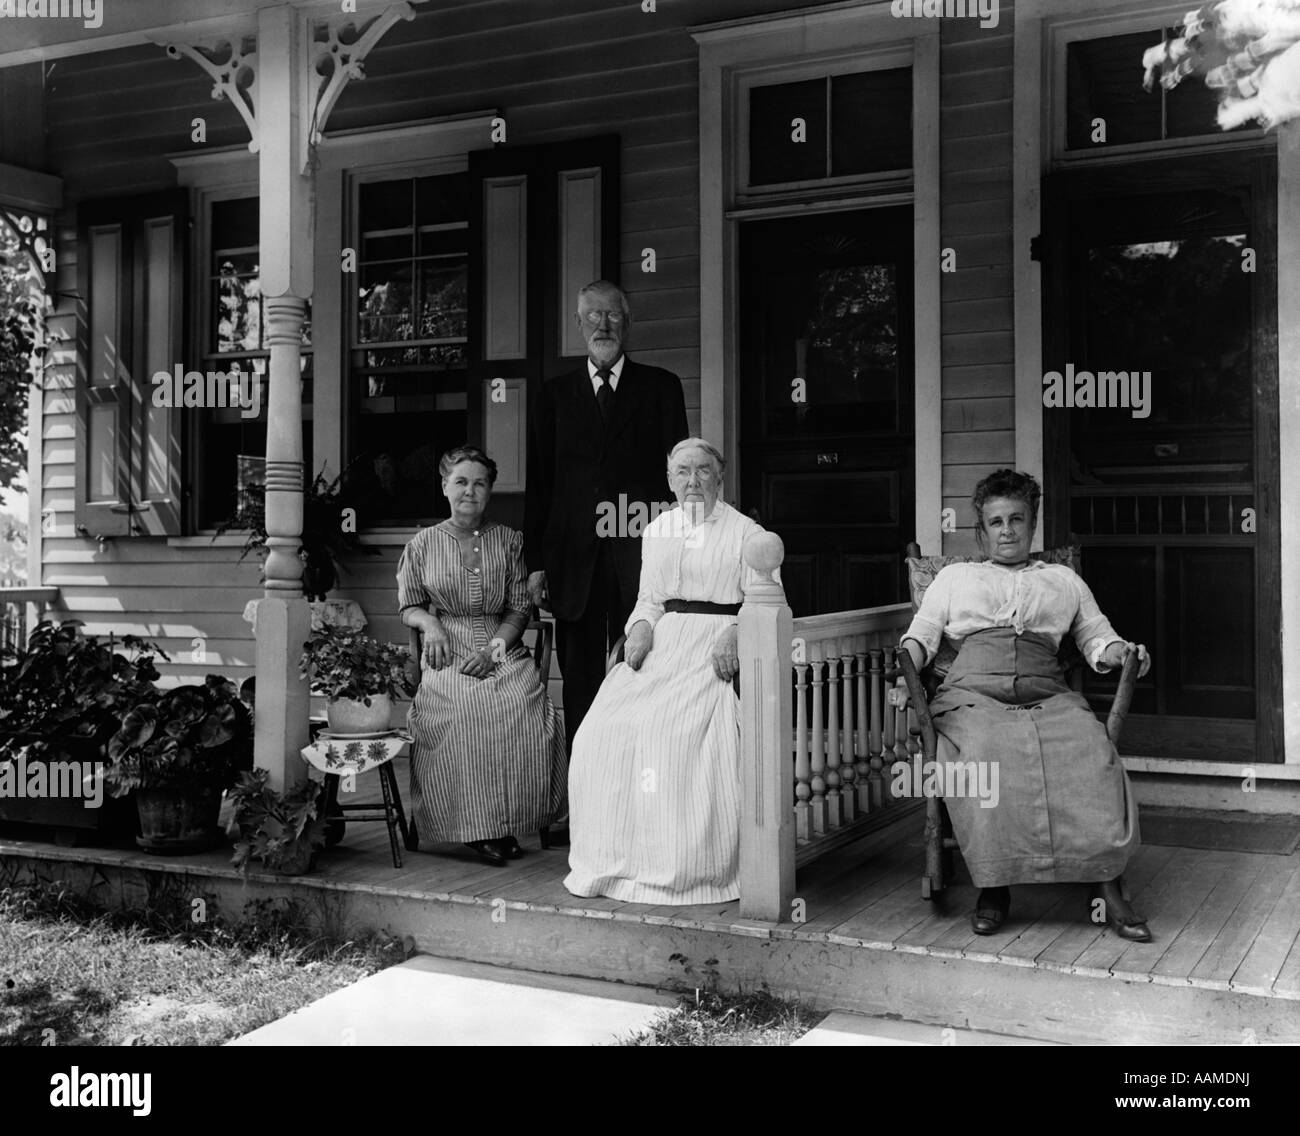 1890s 1900s TURN OF THE CENTURY GROUP OF FOUR NEIGHBORS SITTING ON THE PORCH OF A DUPLEX Stock Photo